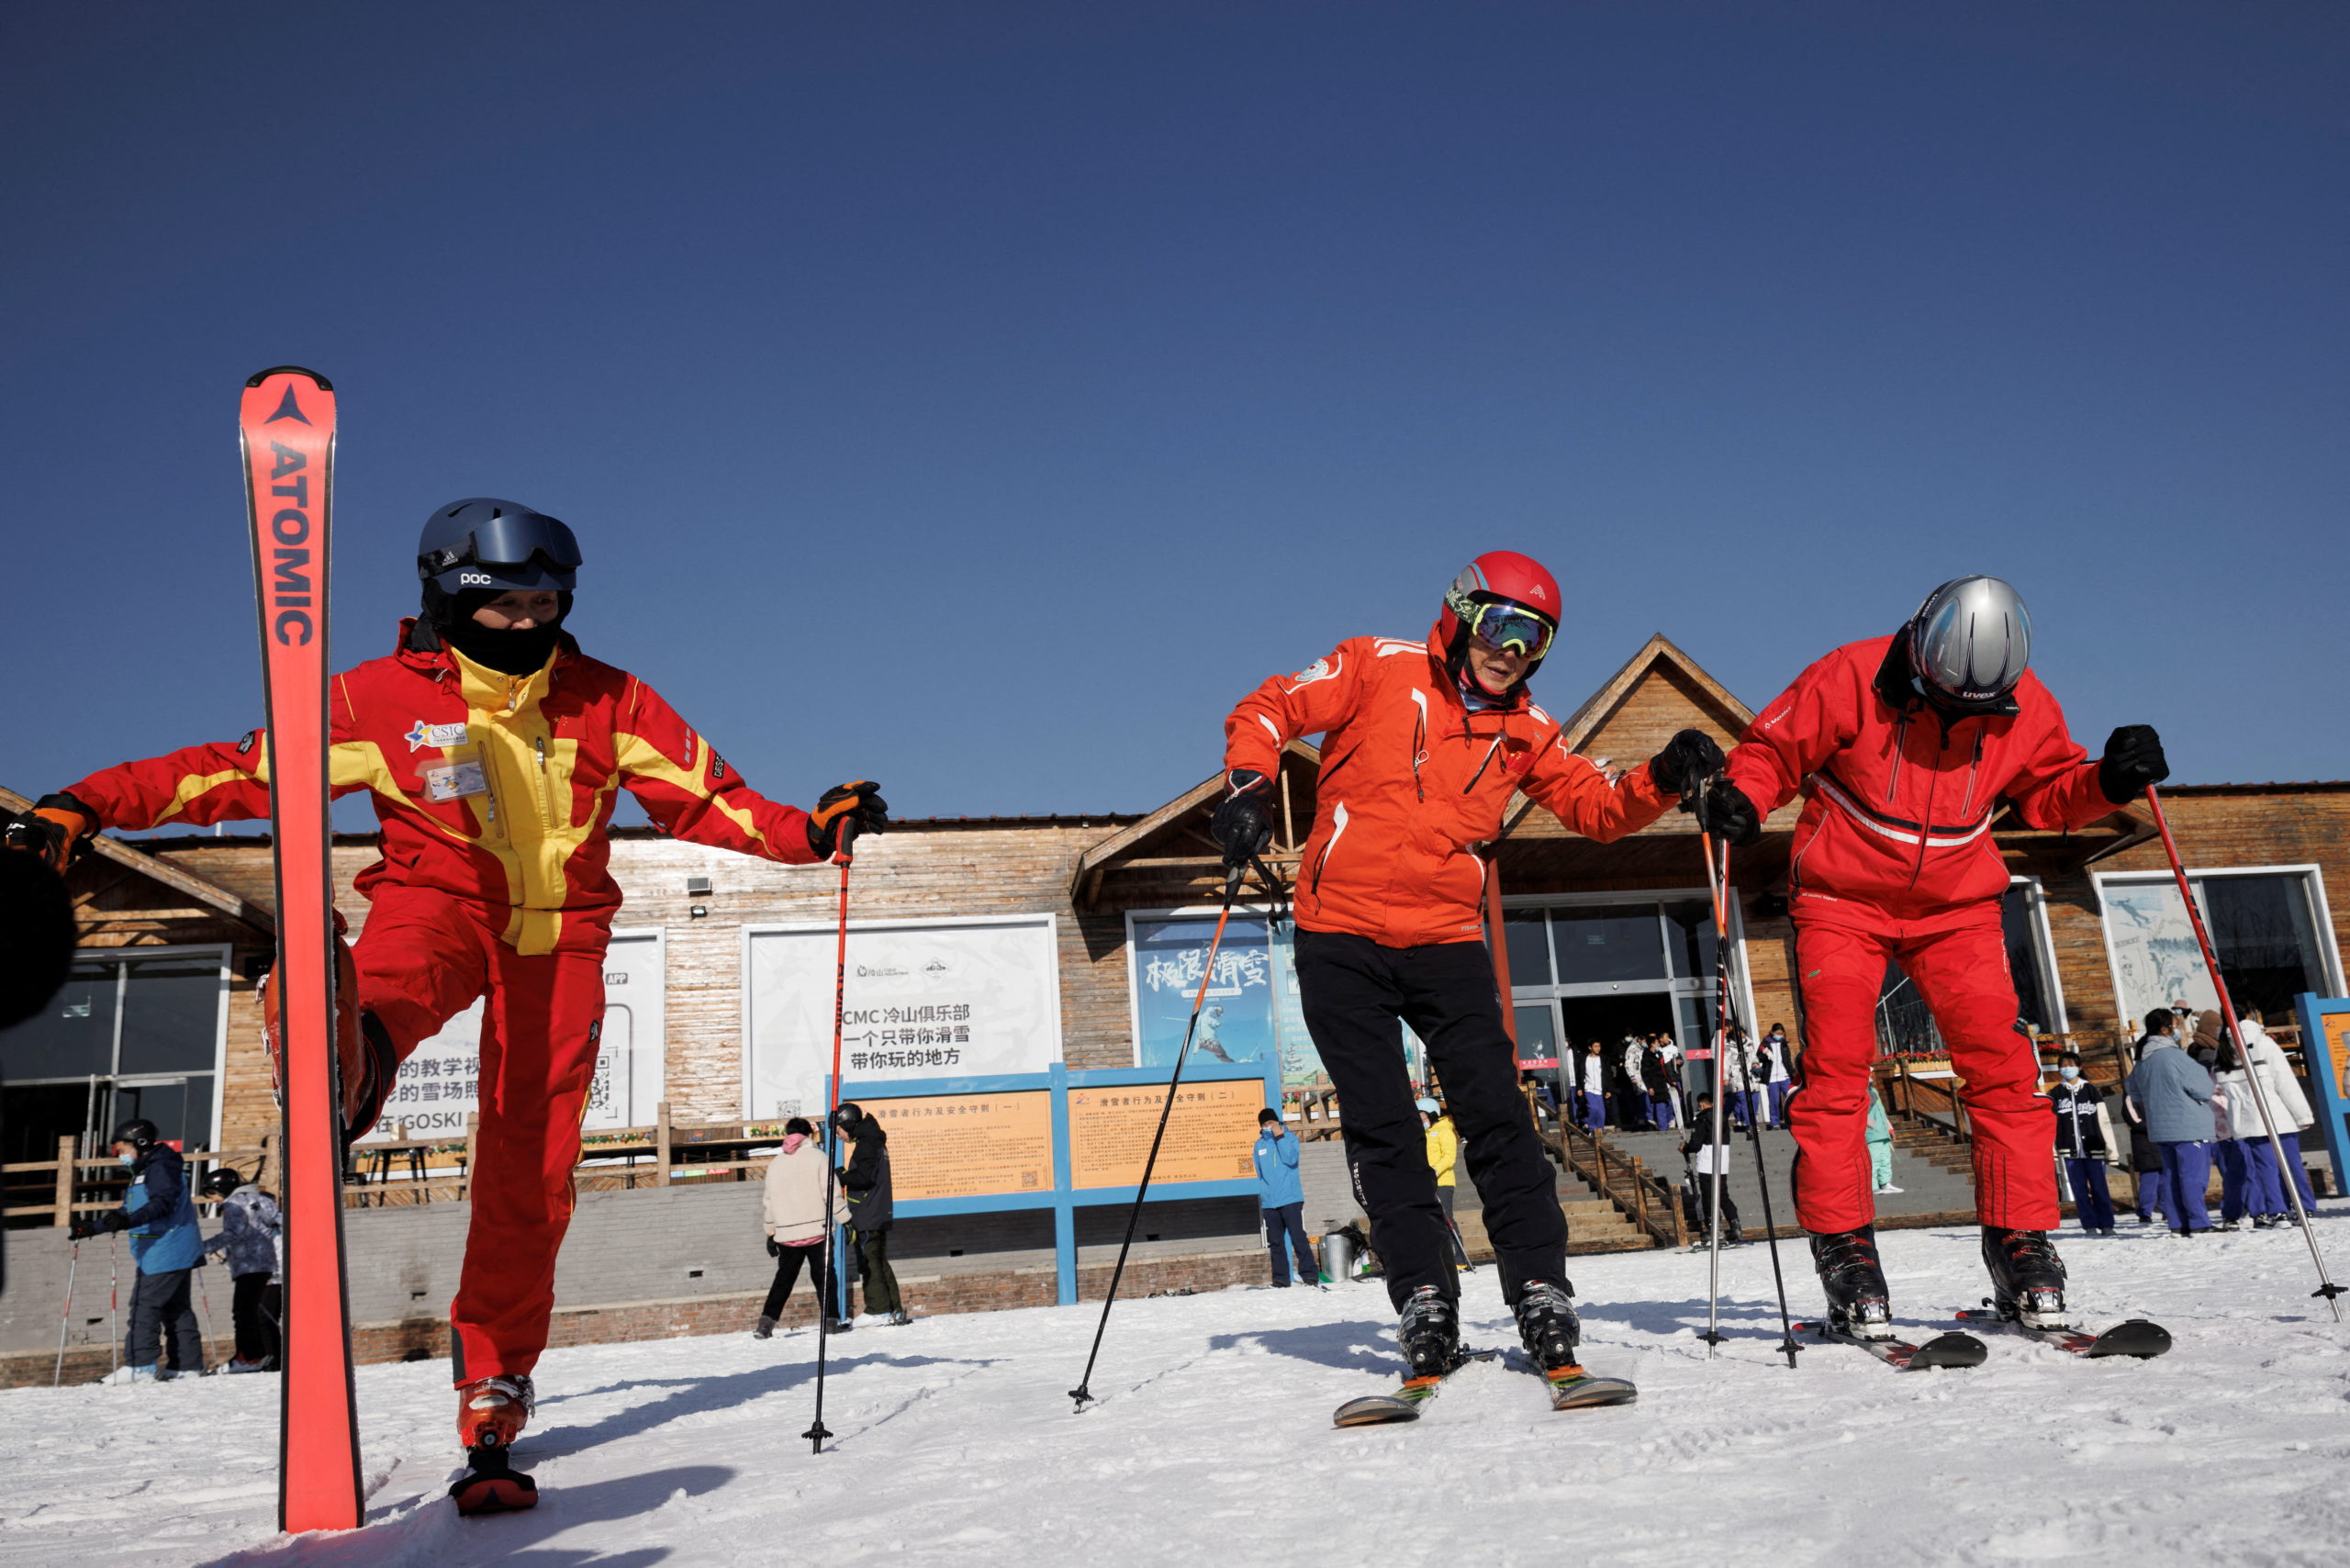 FILE PHOTO: Shan Zhaojian, 84, nicknamed China's "father of skiing", poses for a picture at the Yunju ski resort in Beijing, China, December 29, 2021. Picture taken December 29, 2021 